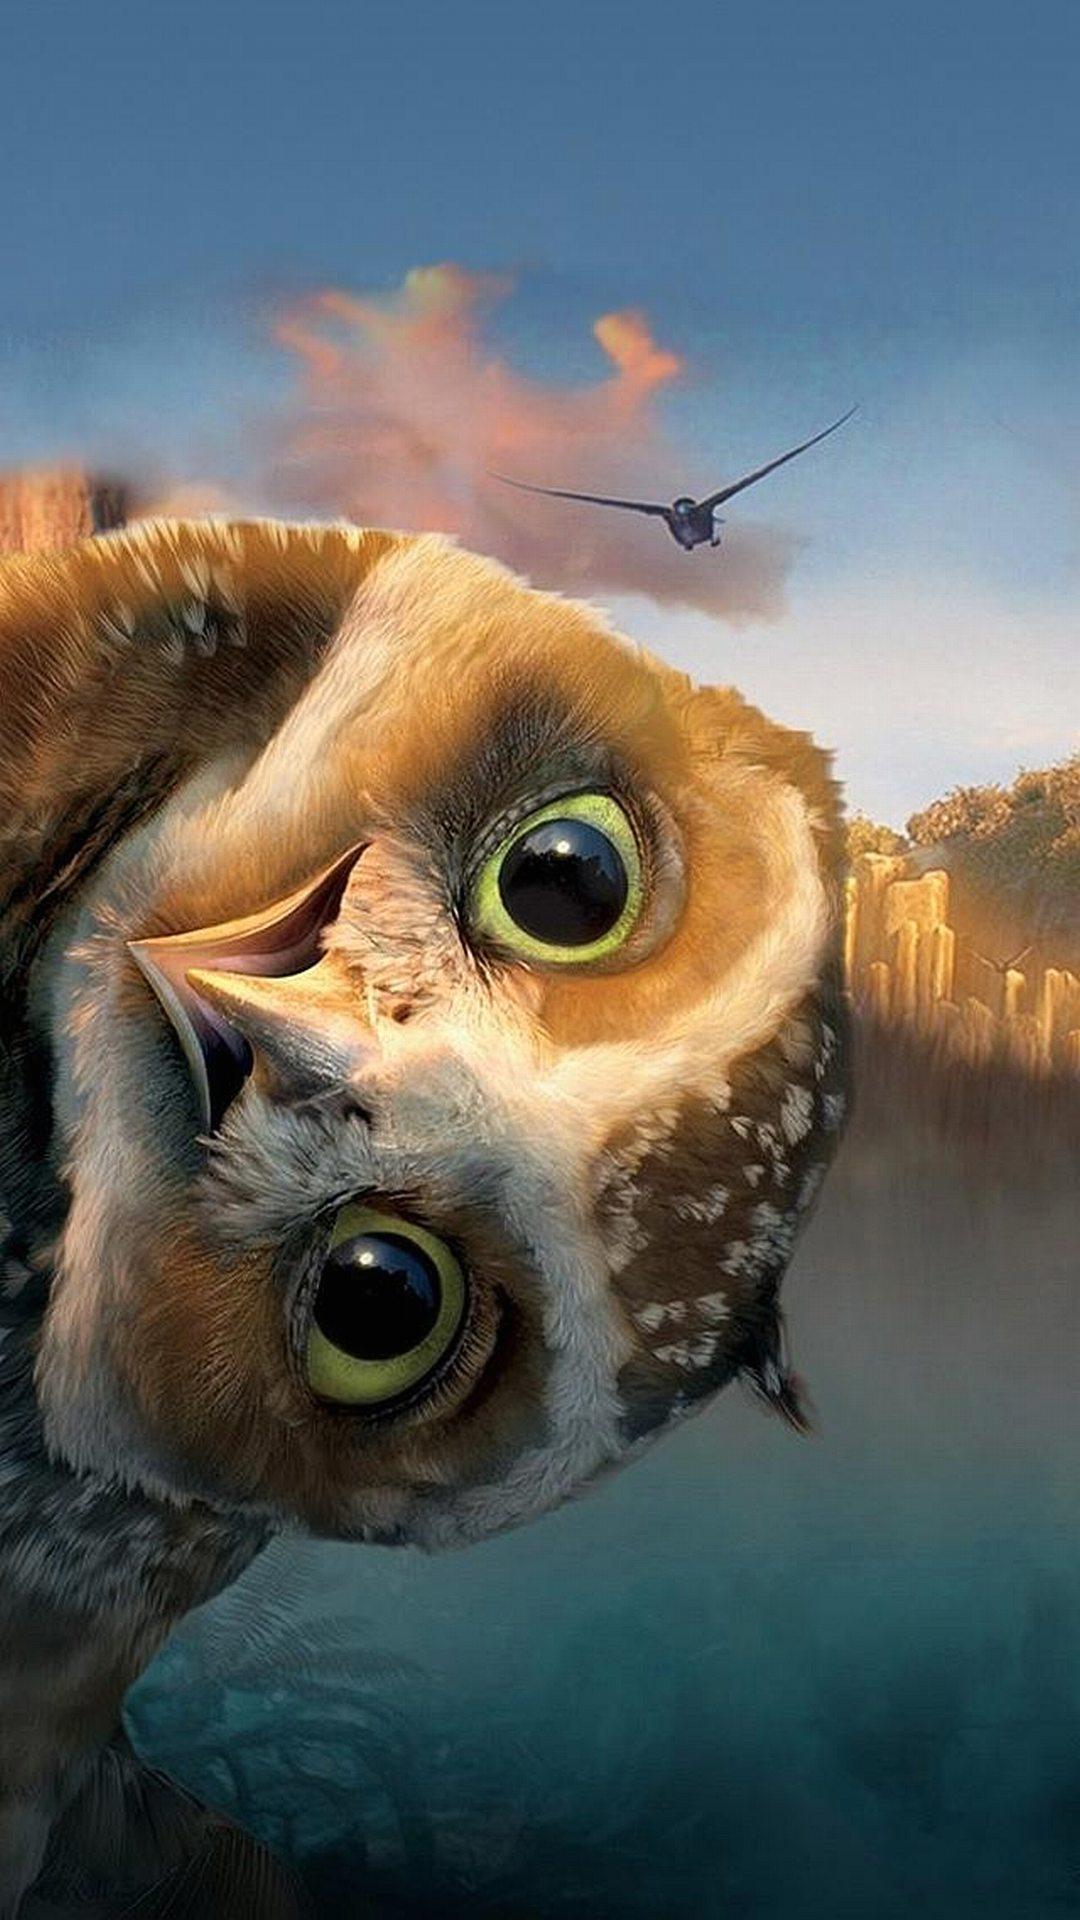 1080 x 1920 · jpeg - Funny owl - Best htc one wallpapers, free and easy to download